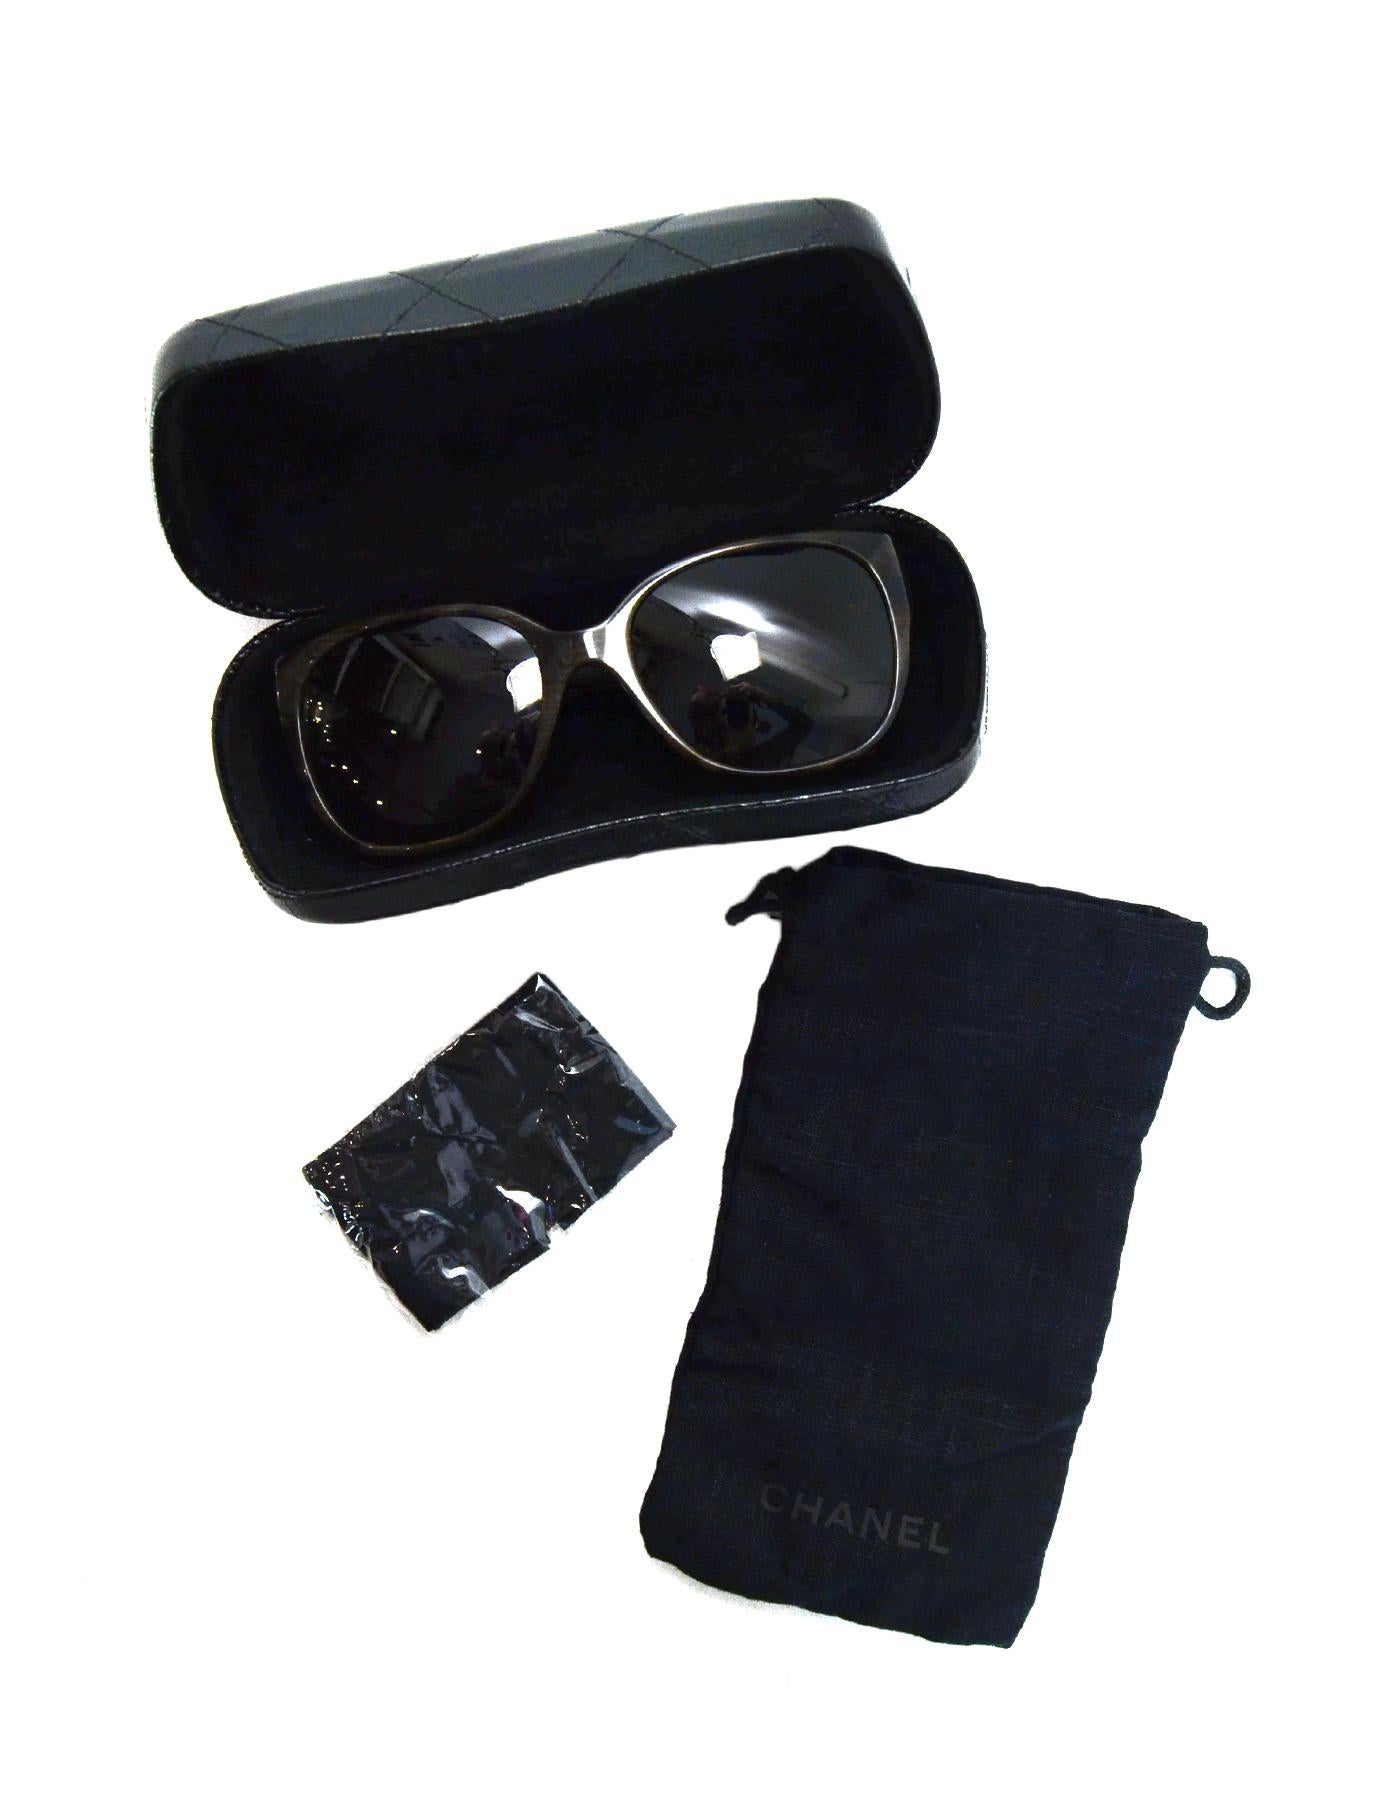 Chanel Brown Polarized Sunglasses W/ Tweed Arm & Boy CC Logo W/ Case & Dust Bag

Made In: Italy
Color: Brown and grey/white tweed 
Hardware: Silvertone
Materials: Resin, metal, tweed
Overall Condition: Excellent pre-owned condition
Includes:  Chanel